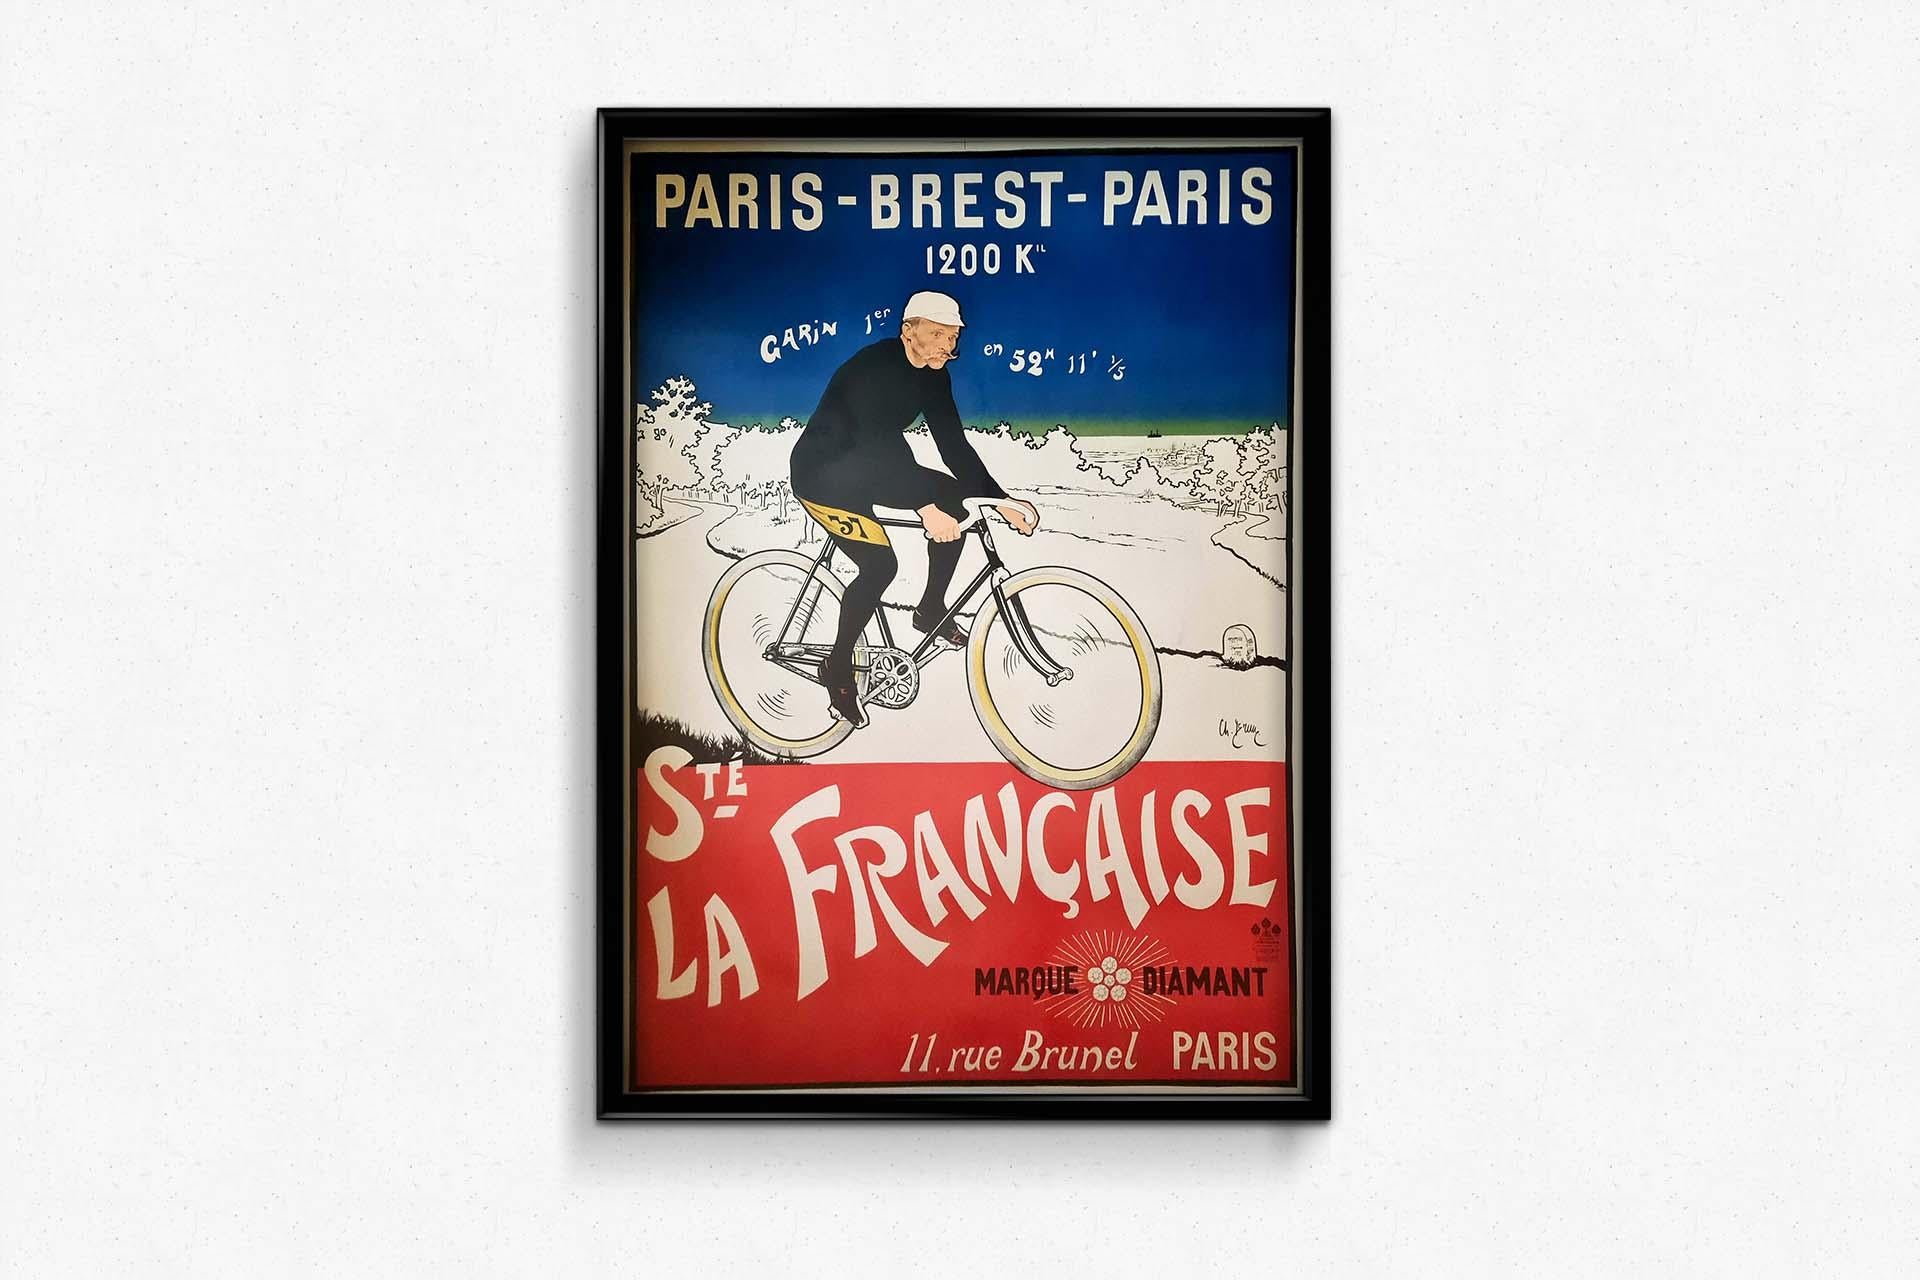 The 1901 original poster by the artist Brun for 